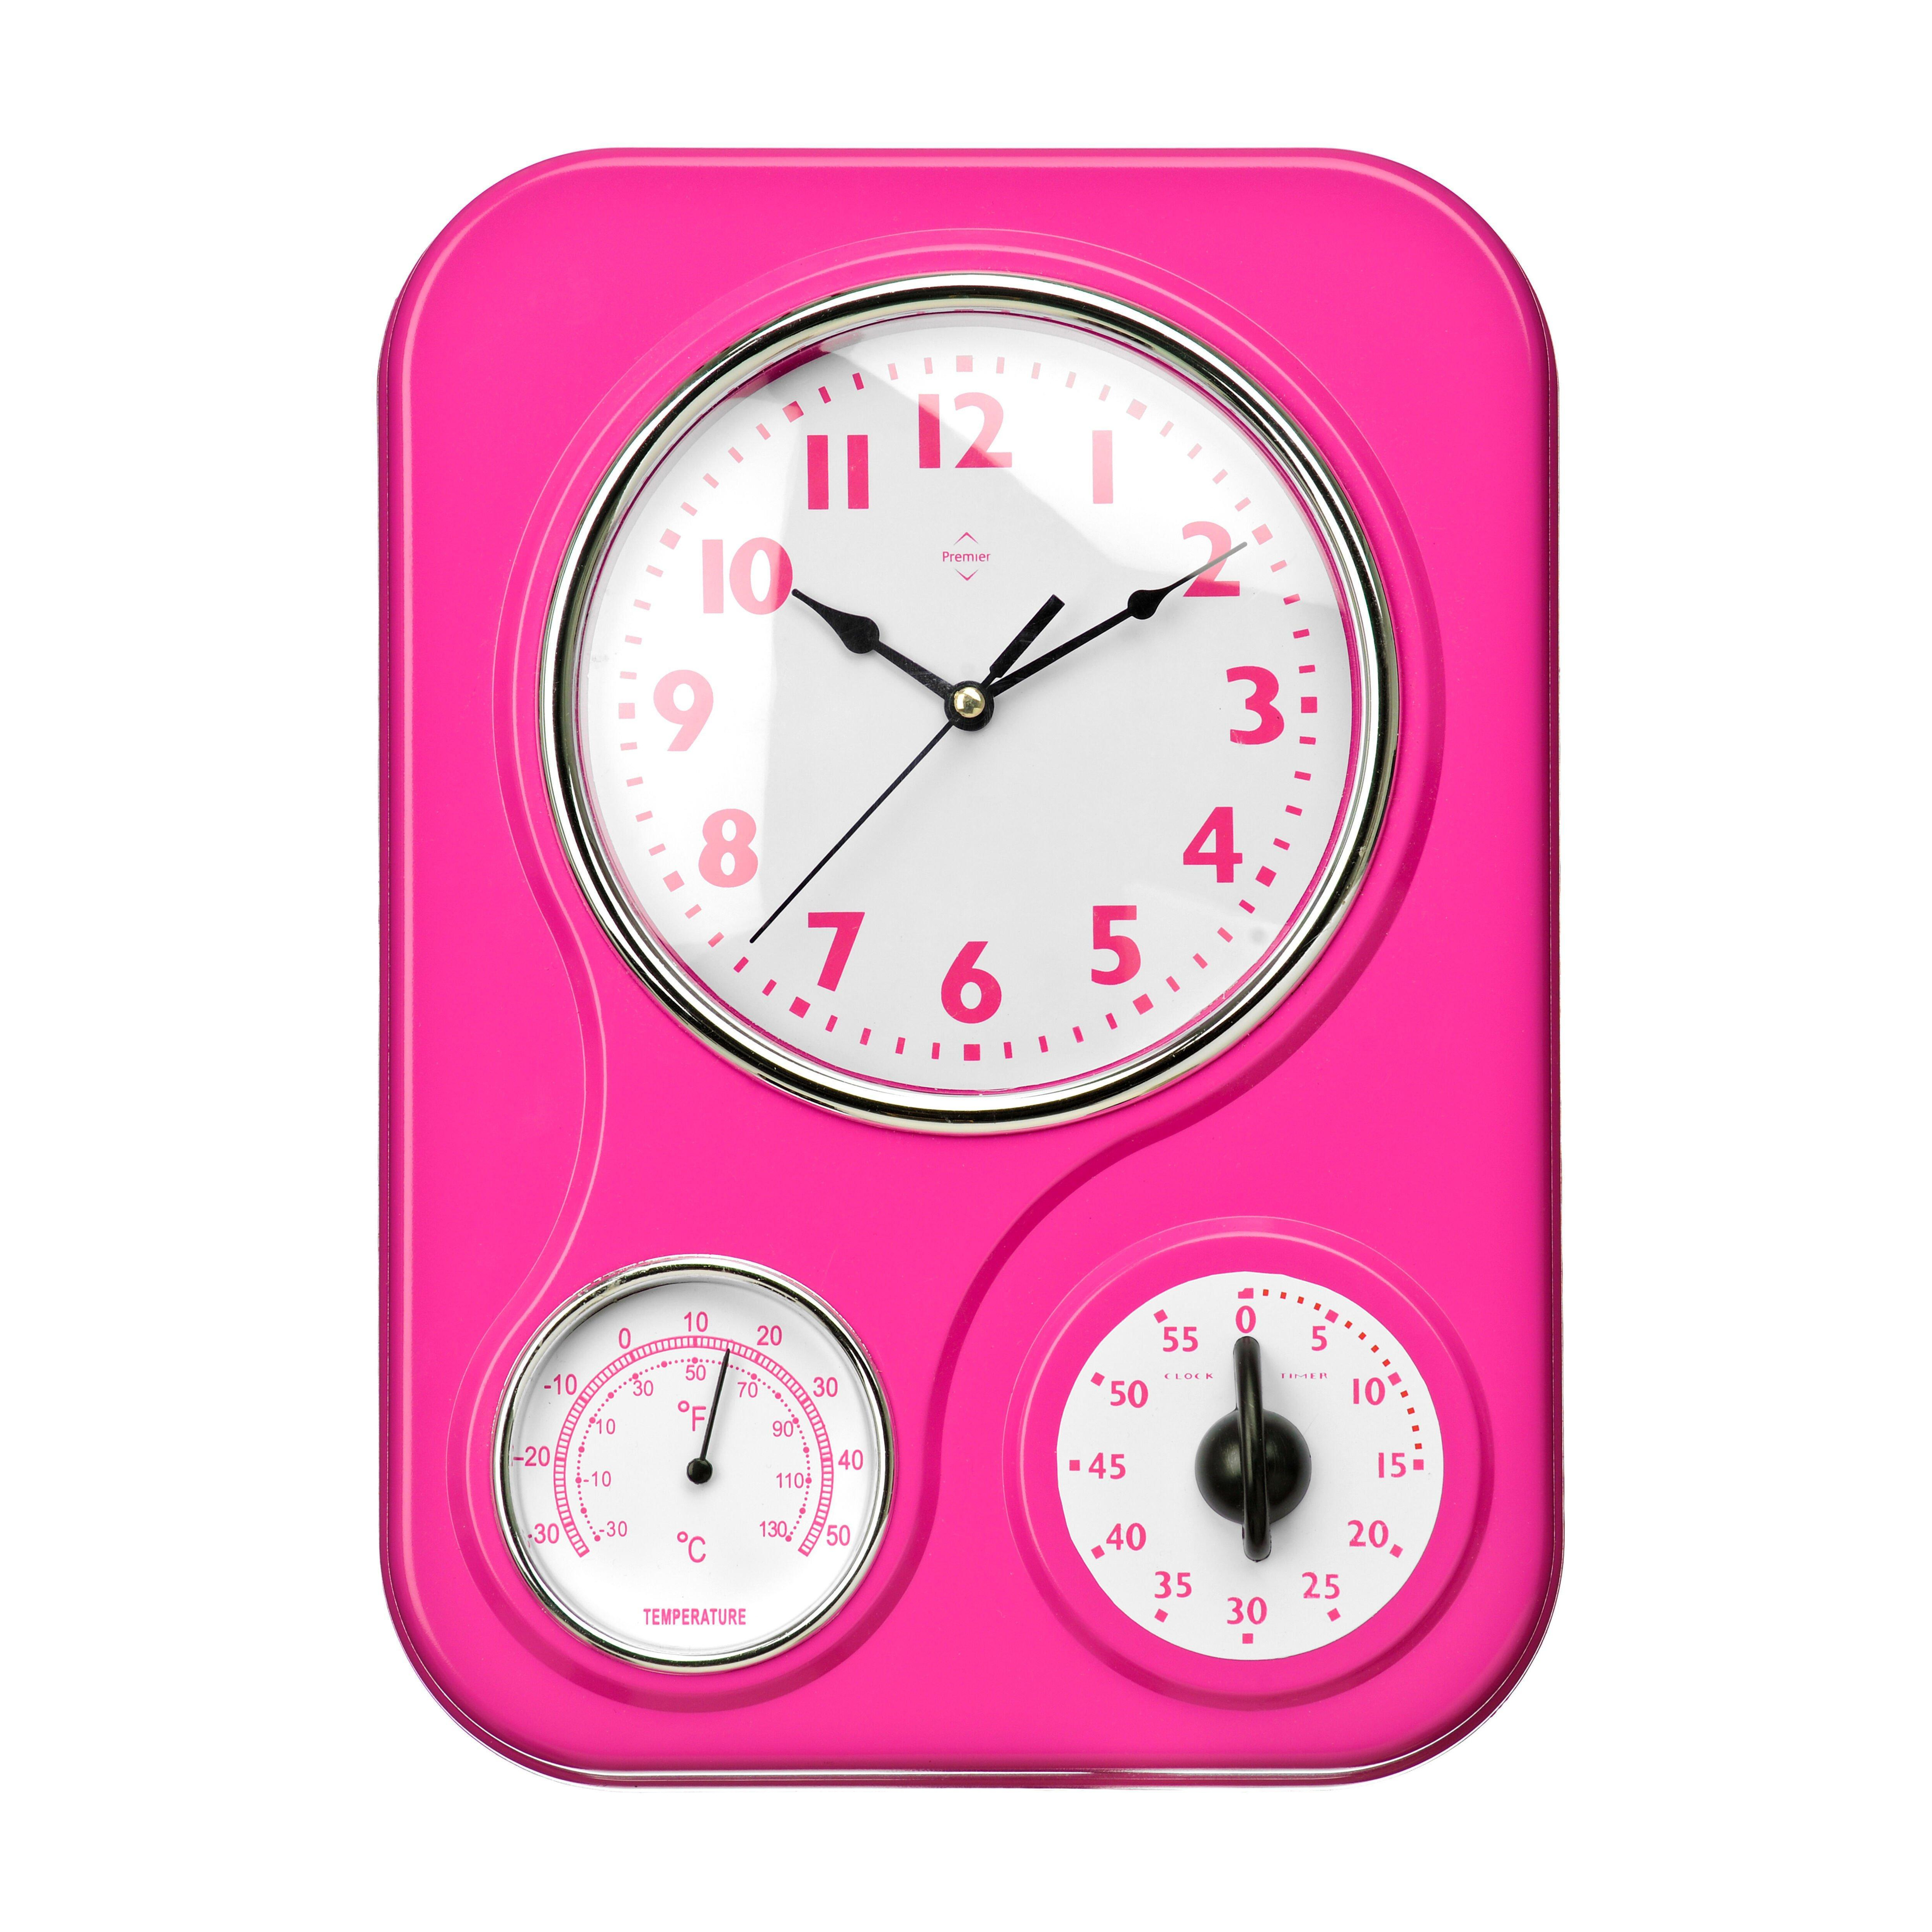 Maison by Premier Hot Pink Timer/Temperature Display Wall Clock - image 1